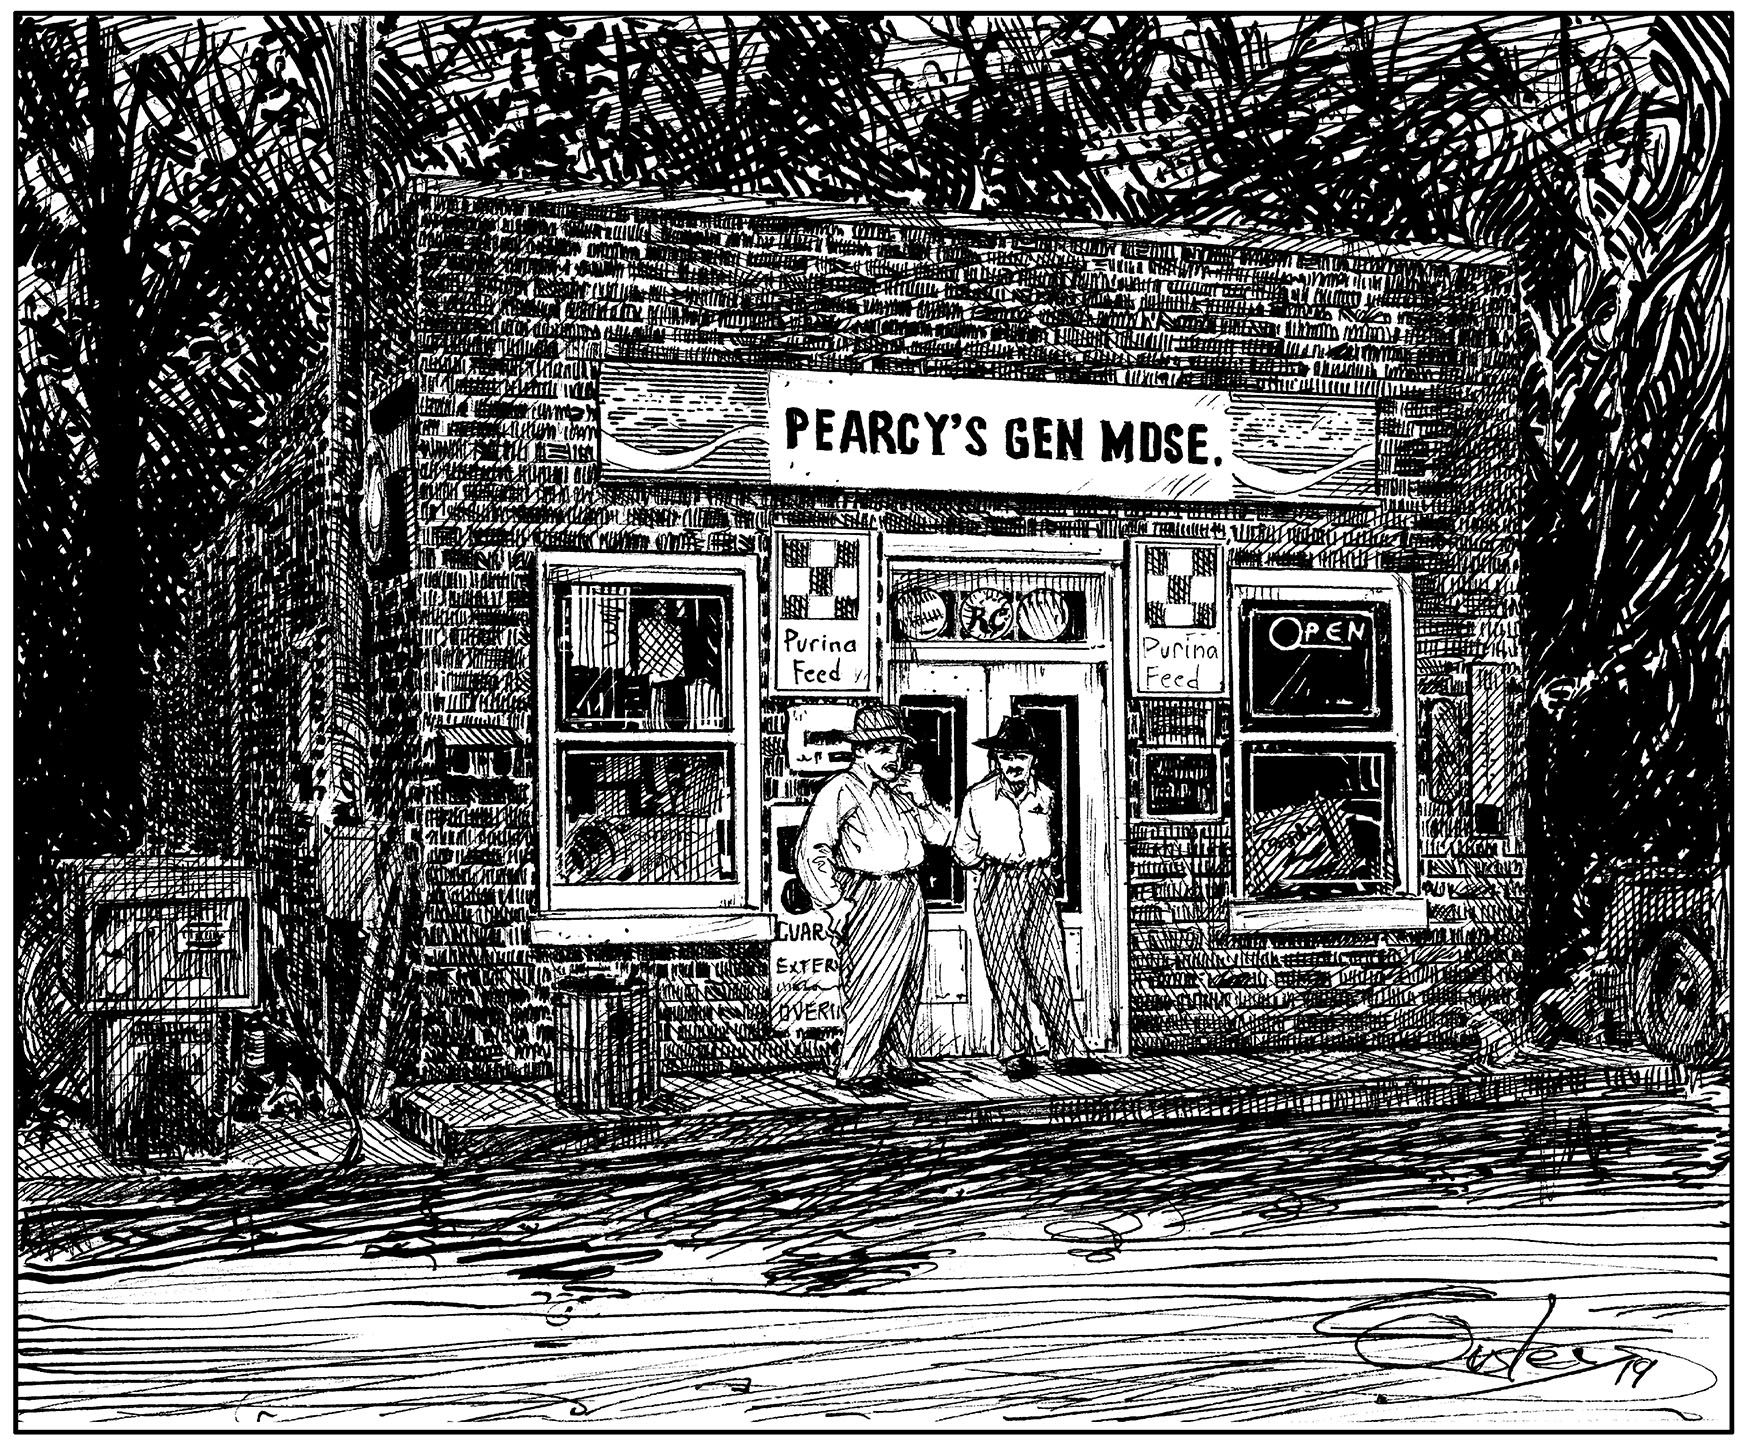 Pearcy's General Store in Lascassas Tennessee